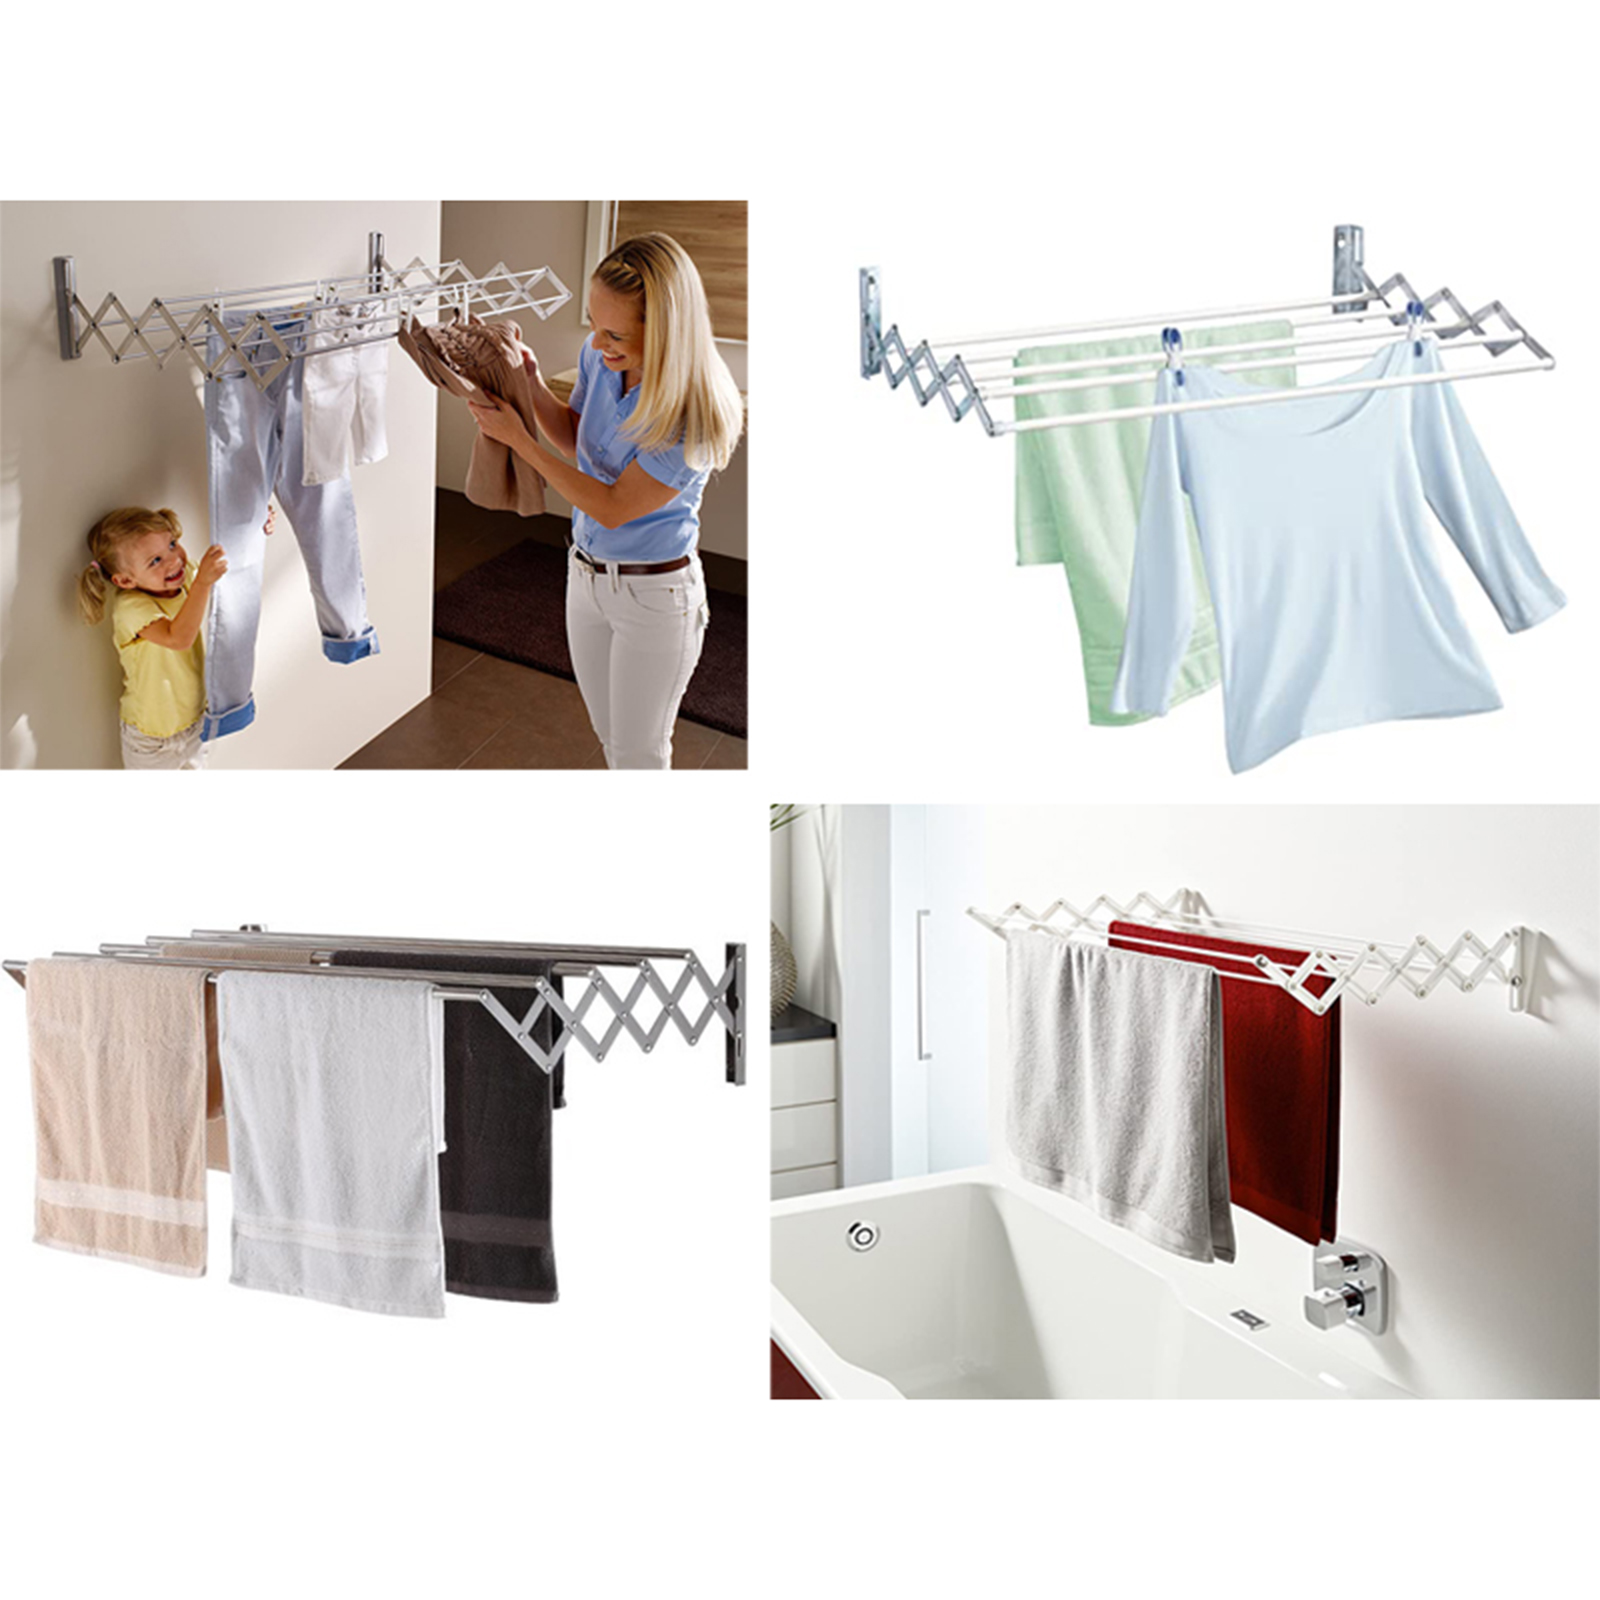 80cm Retractable Foldable Wall Hanging Drying Rack Balcony Clothes